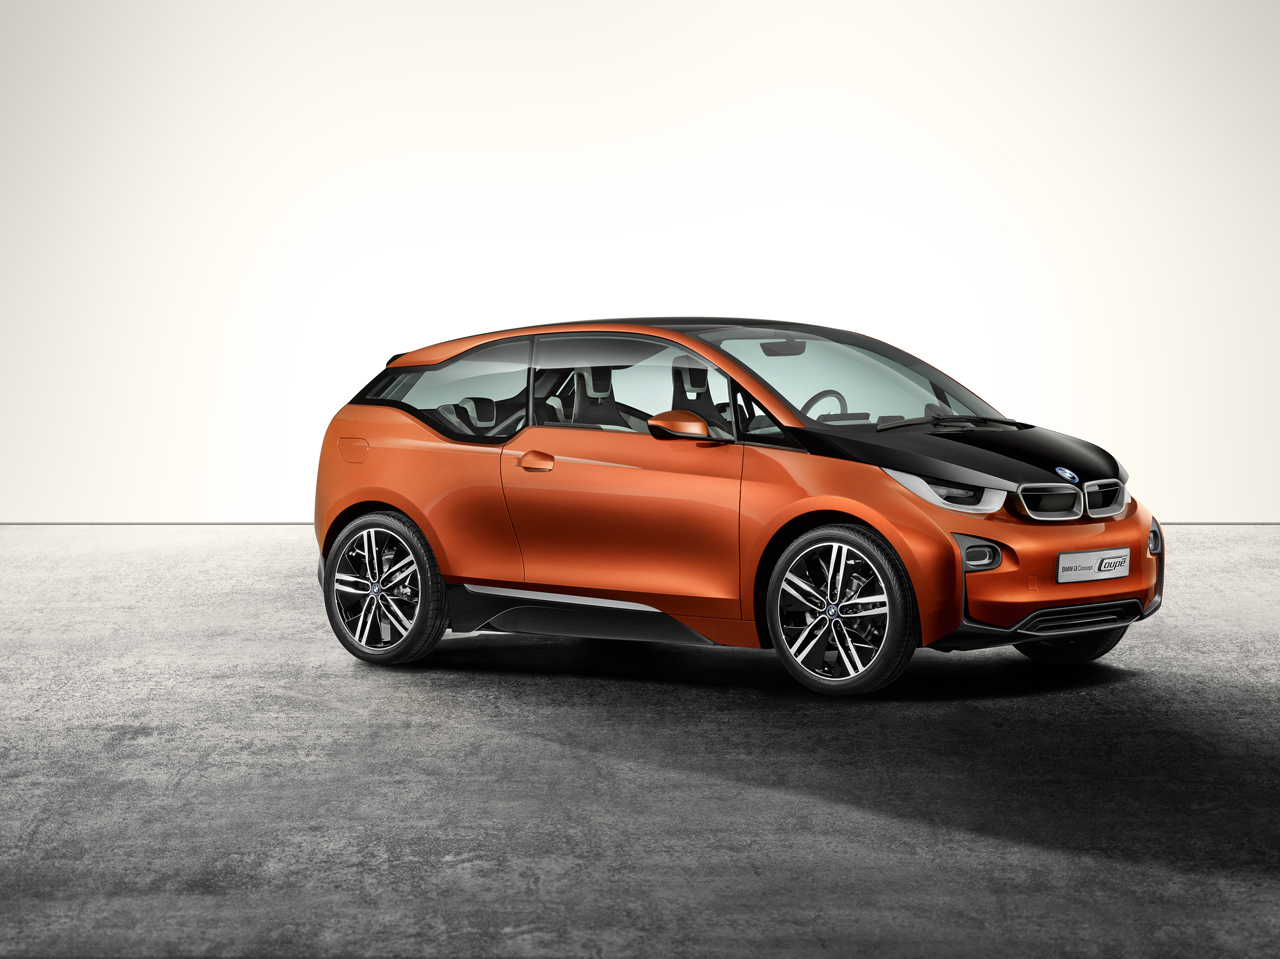 Bmw I3 Concept Coupe Wallpapers Vehicles Hq Bmw I3 Concept Coupe Pictures 4k Wallpapers 2019